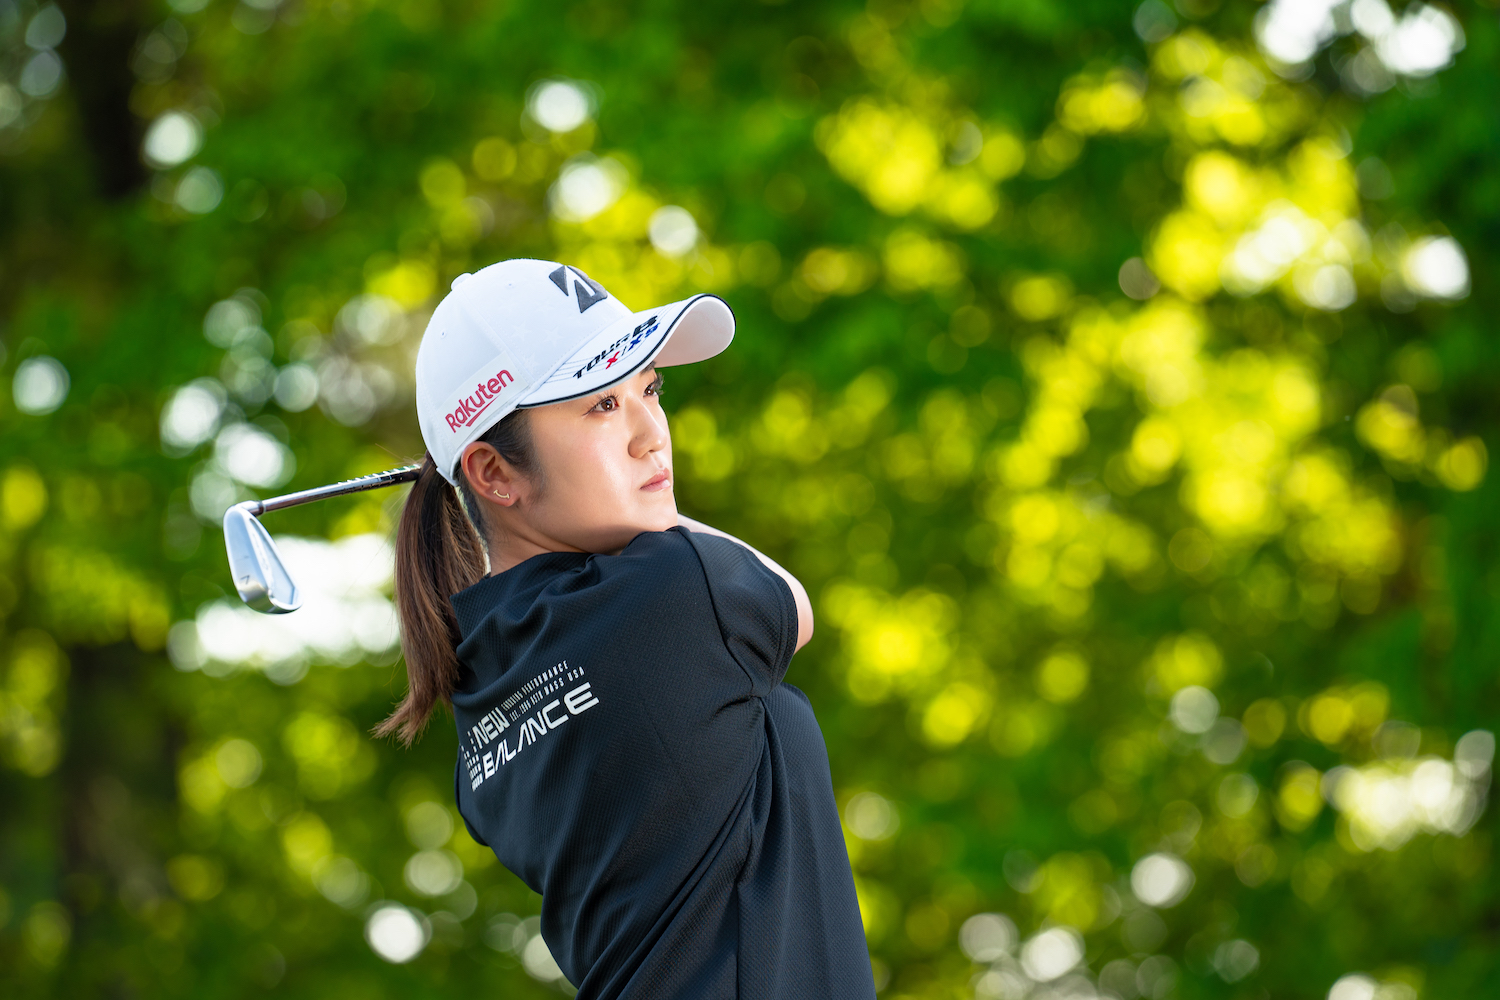 Rakuten announced a new sponsorship agreement with 21-year old up-and-coming star LPGA golfer Mone Inami on April 29, 2021.